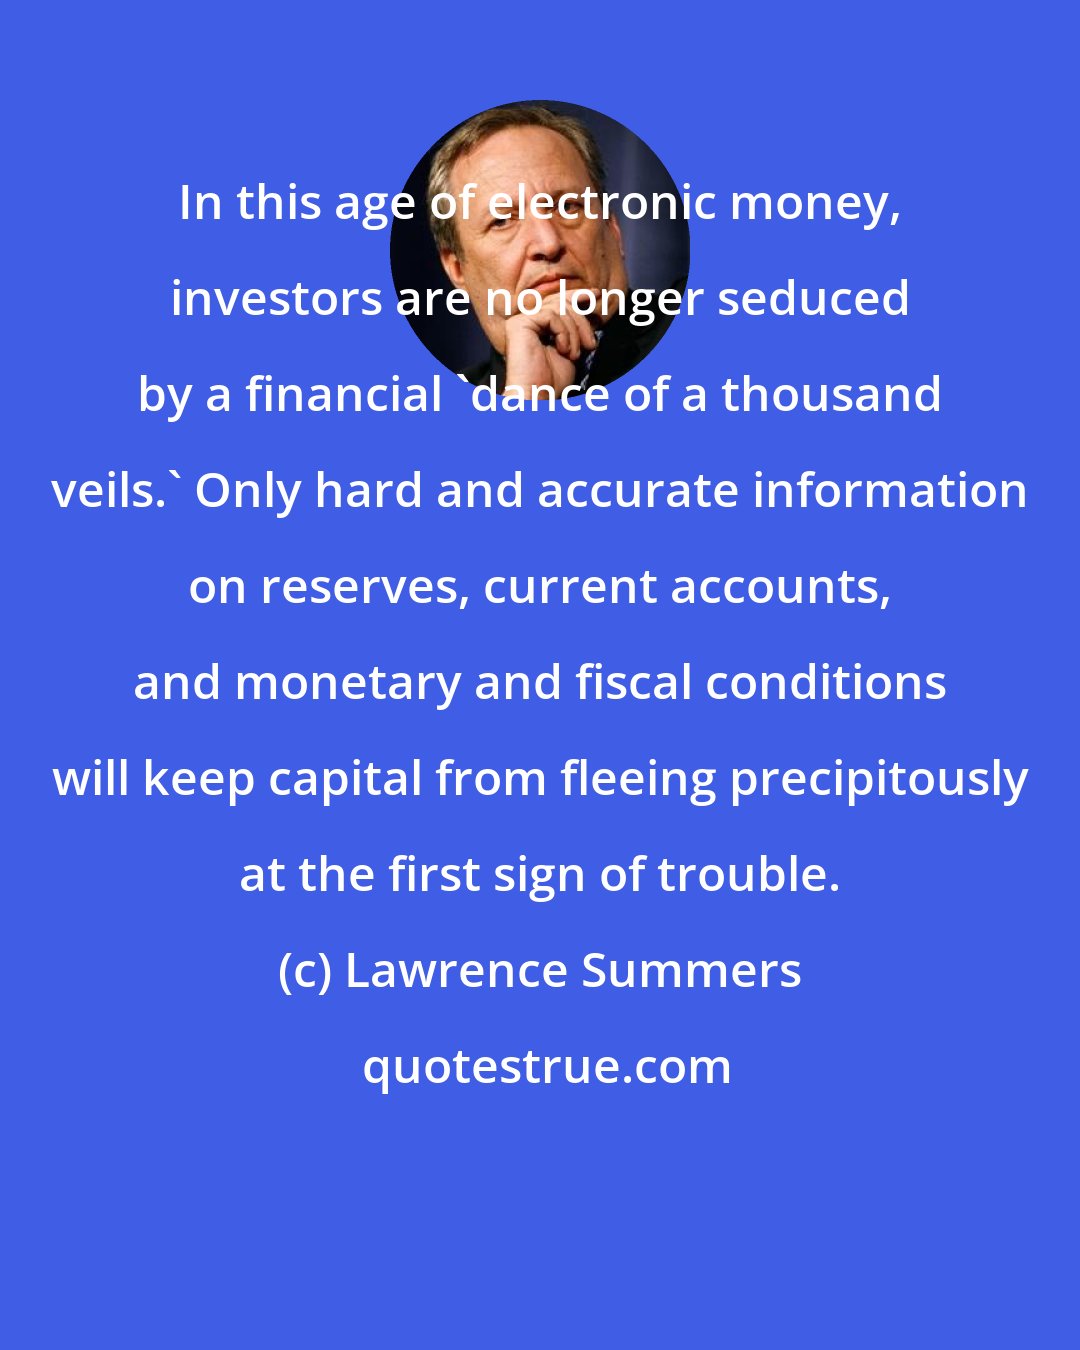 Lawrence Summers: In this age of electronic money, investors are no longer seduced by a financial 'dance of a thousand veils.' Only hard and accurate information on reserves, current accounts, and monetary and fiscal conditions will keep capital from fleeing precipitously at the first sign of trouble.